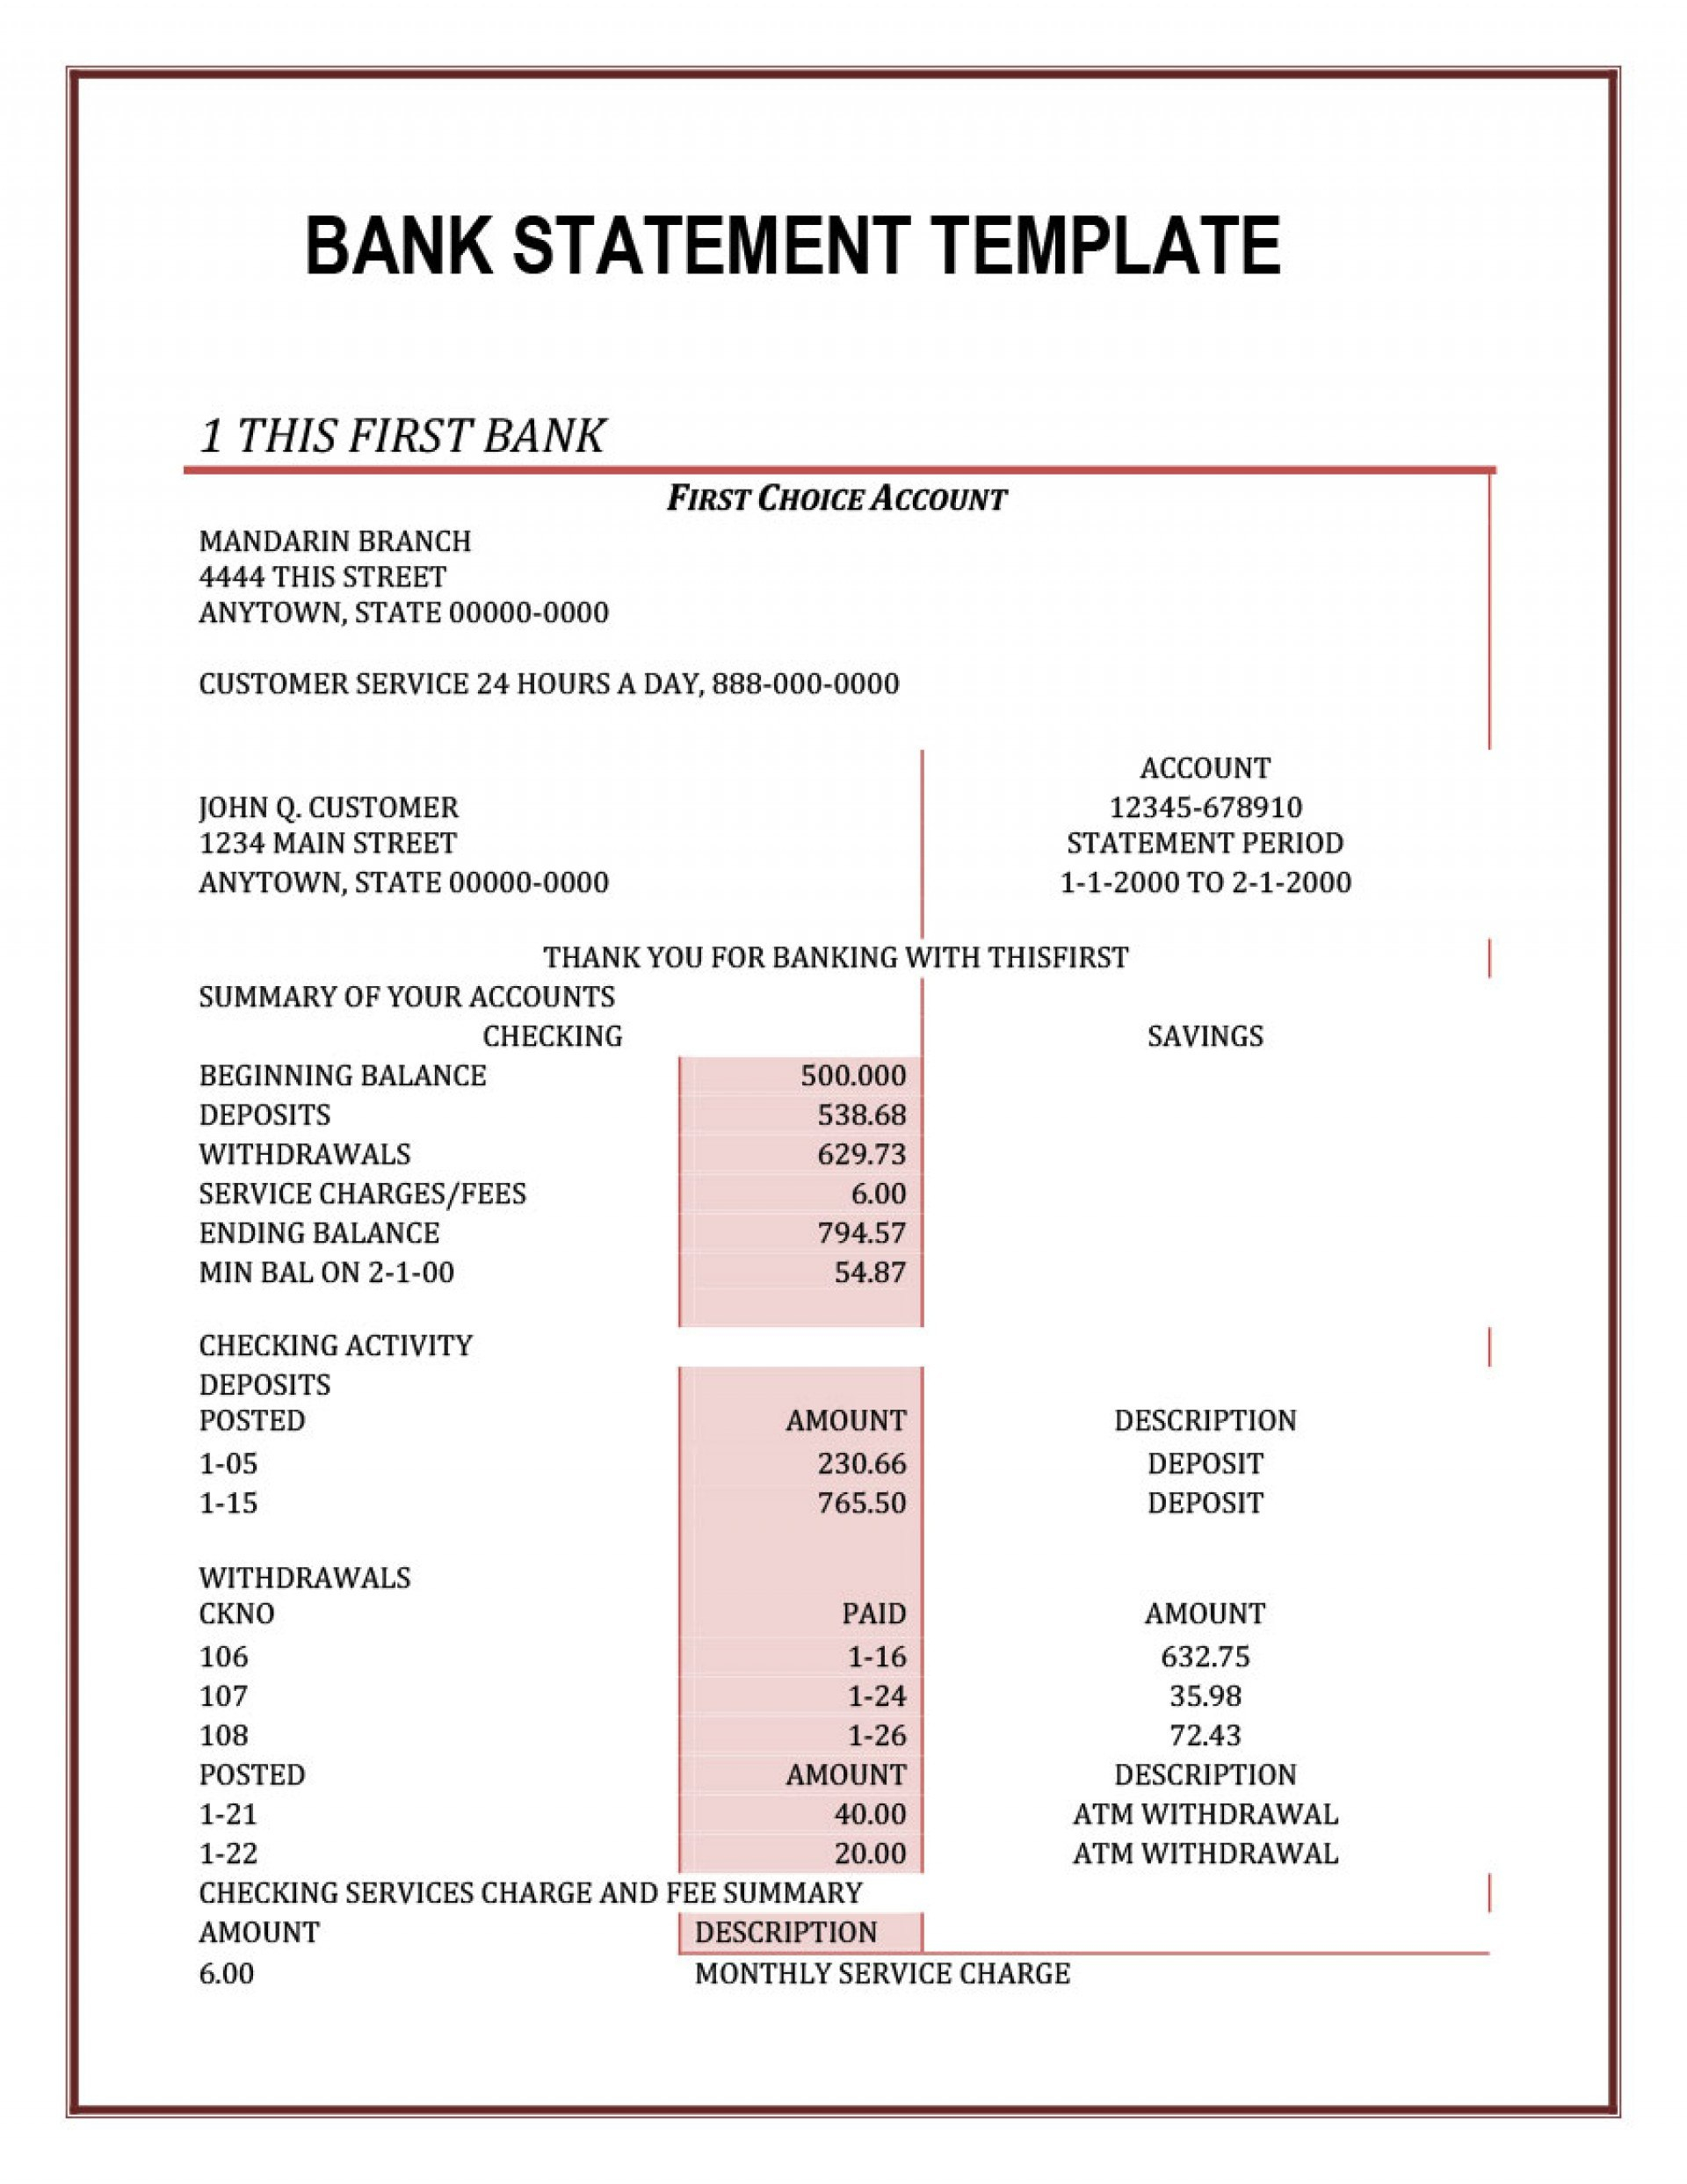 Bank Statement Template Download Free Phenomenal Ideas Of Baroda within Blank Bank Statement Template Download